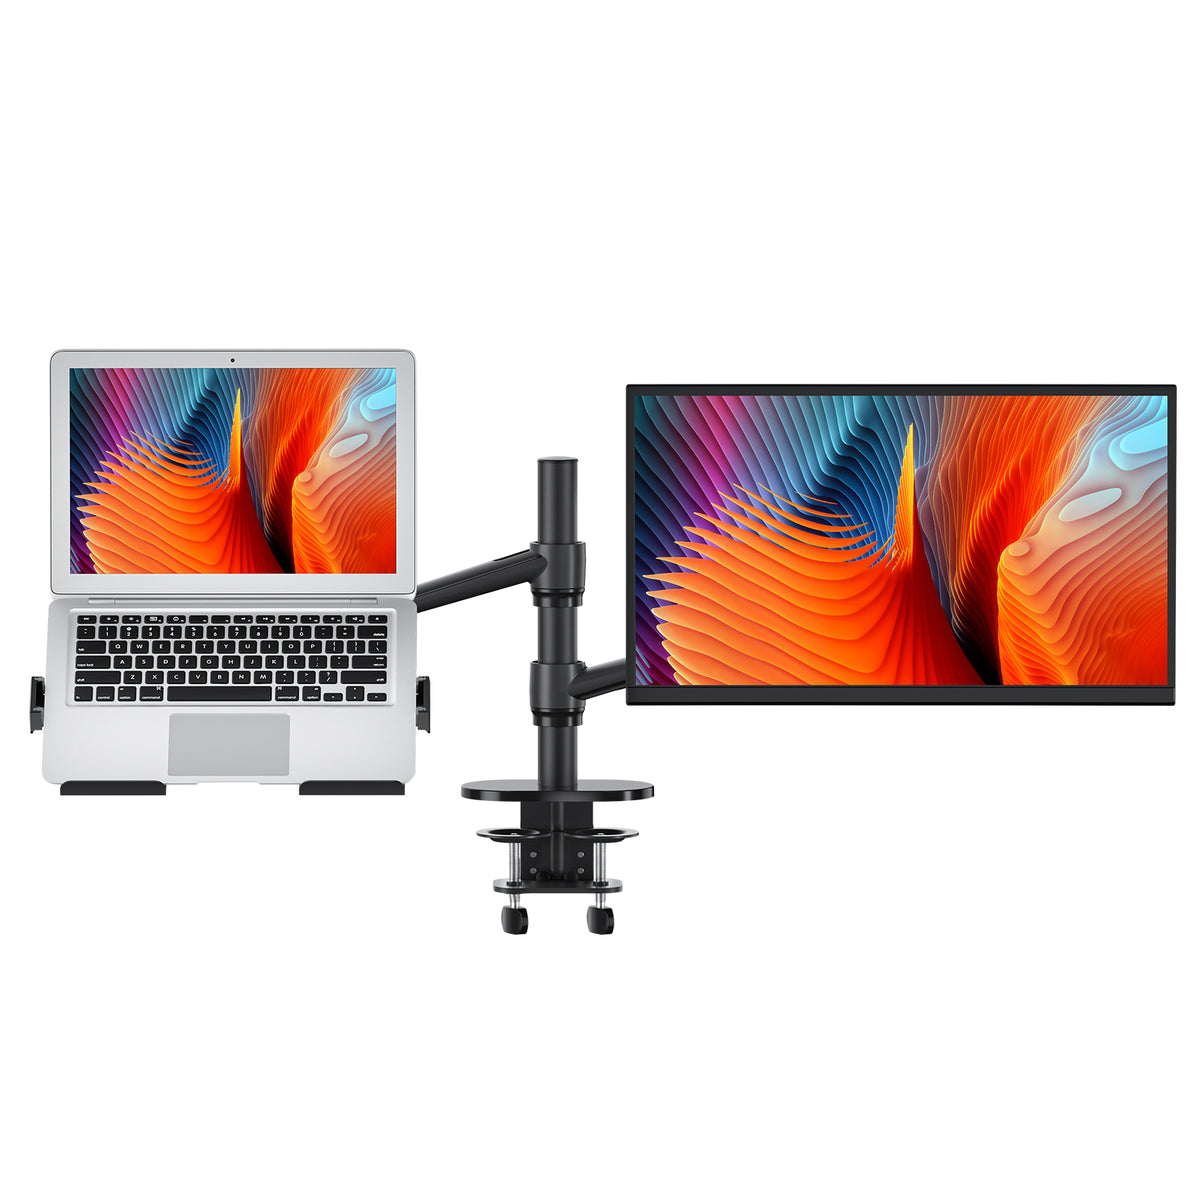 Viozon Dual Arm Stand for Laptop and Monitor (DZ-OLL-3L)